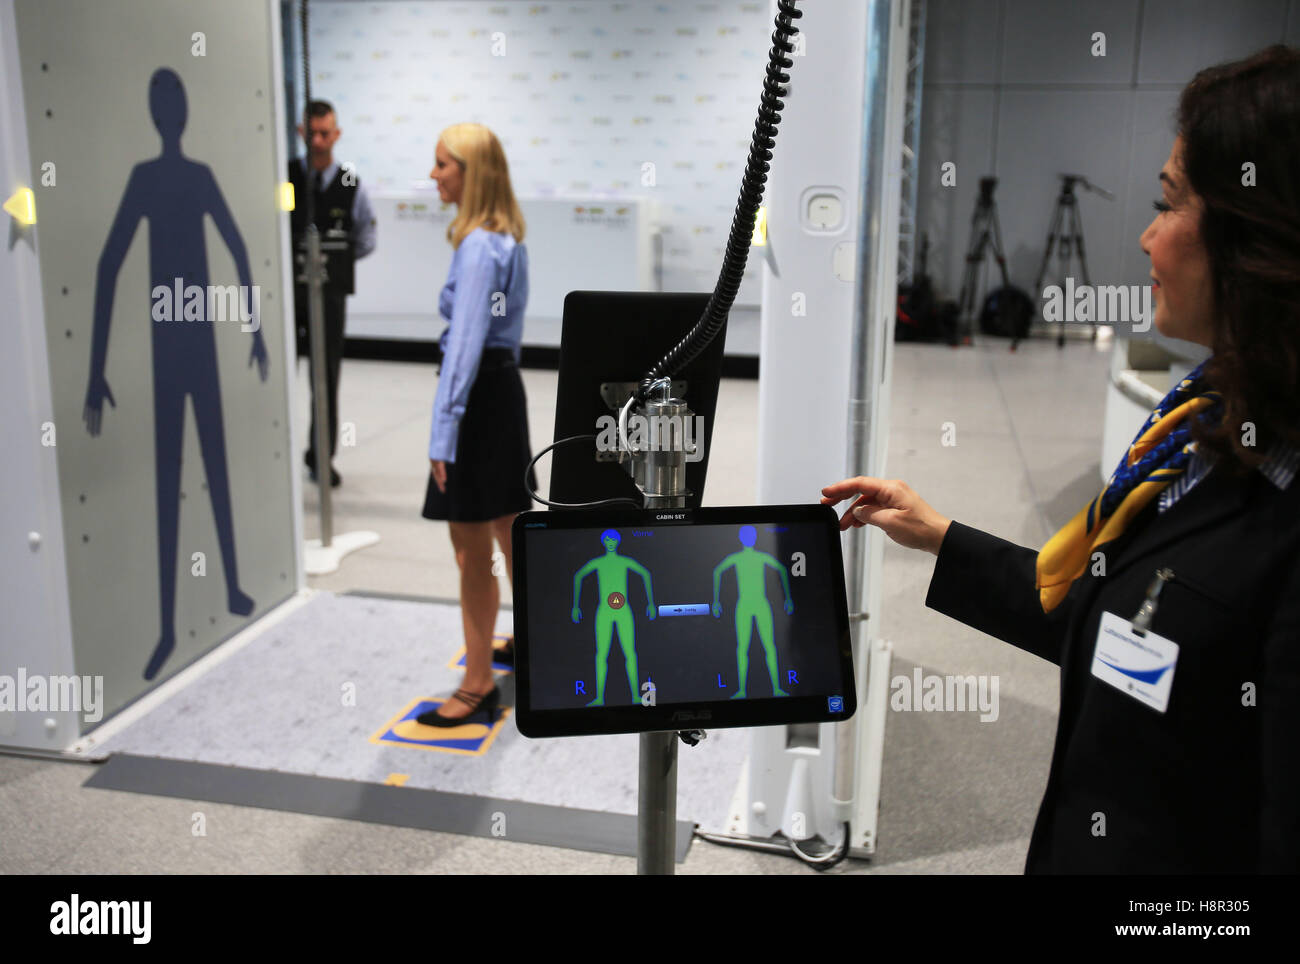 https://c8.alamy.com/comp/H8R305/cologne-germany-15th-nov-2016-the-images-of-a-full-body-scanner-can-H8R305.jpg